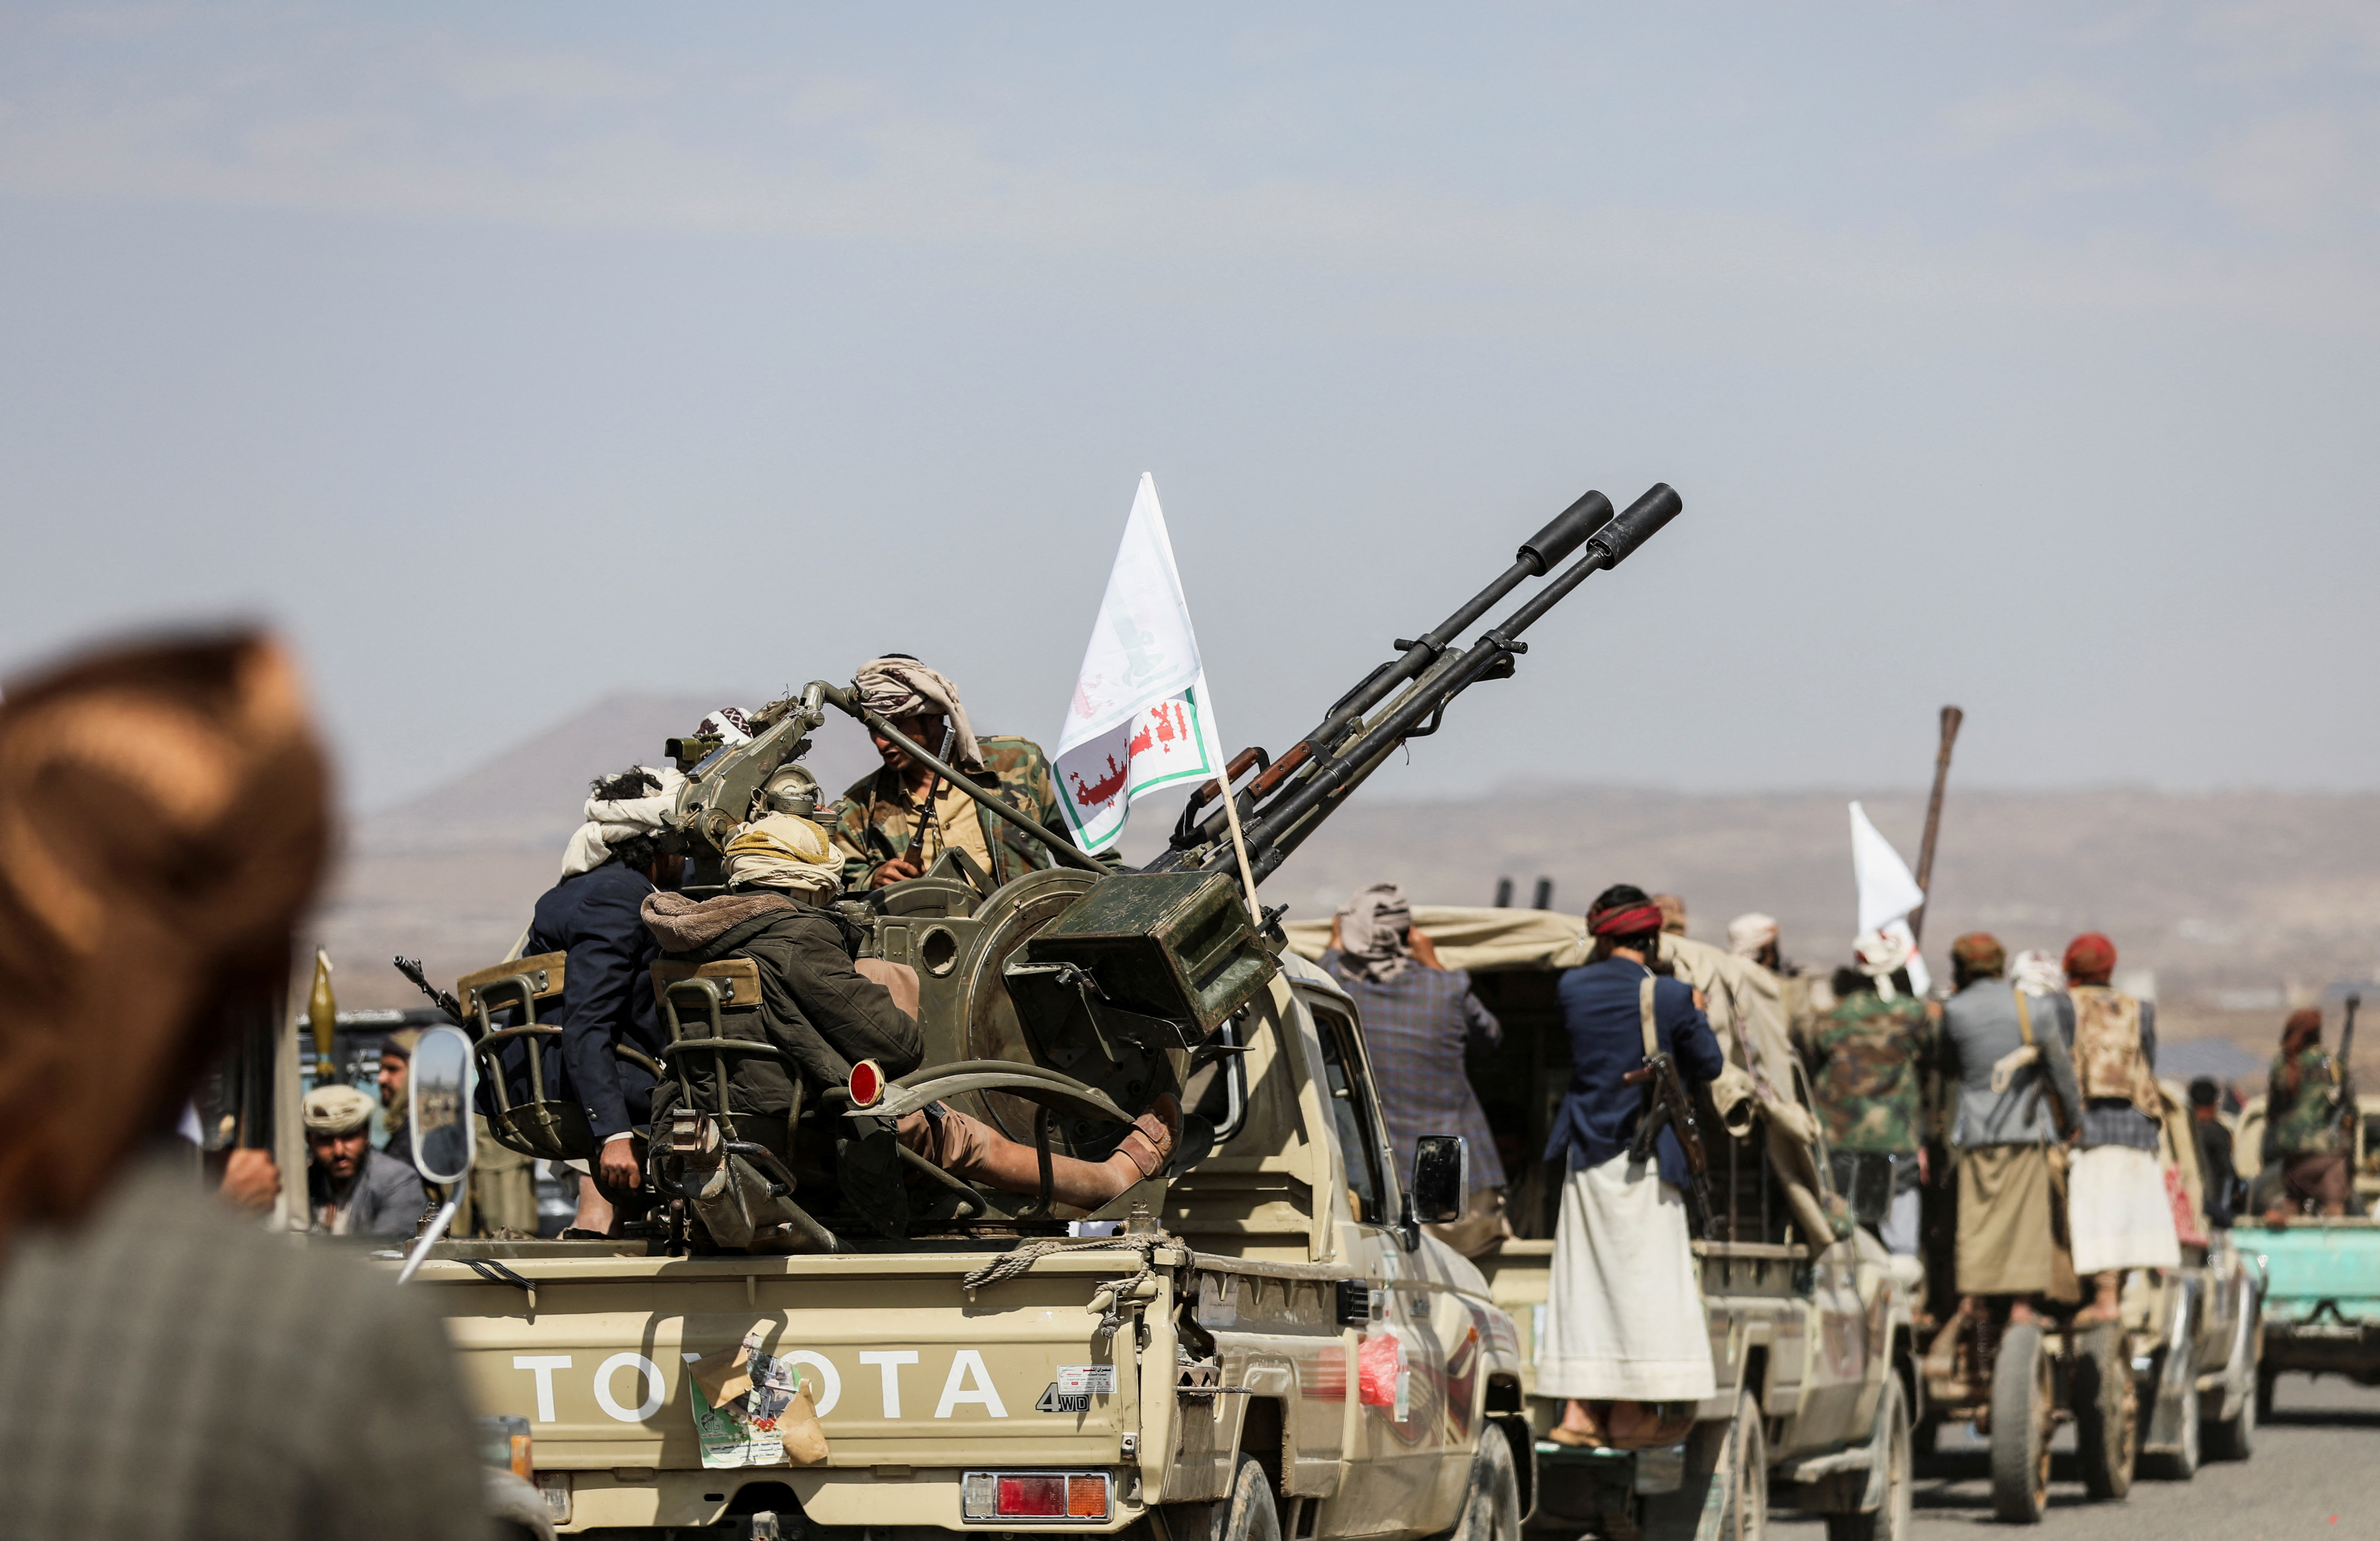 Houthi tribesmen gather to show defiance after US and UK strikes on Houthi positions near Sanaa, Yemen, on February 4.